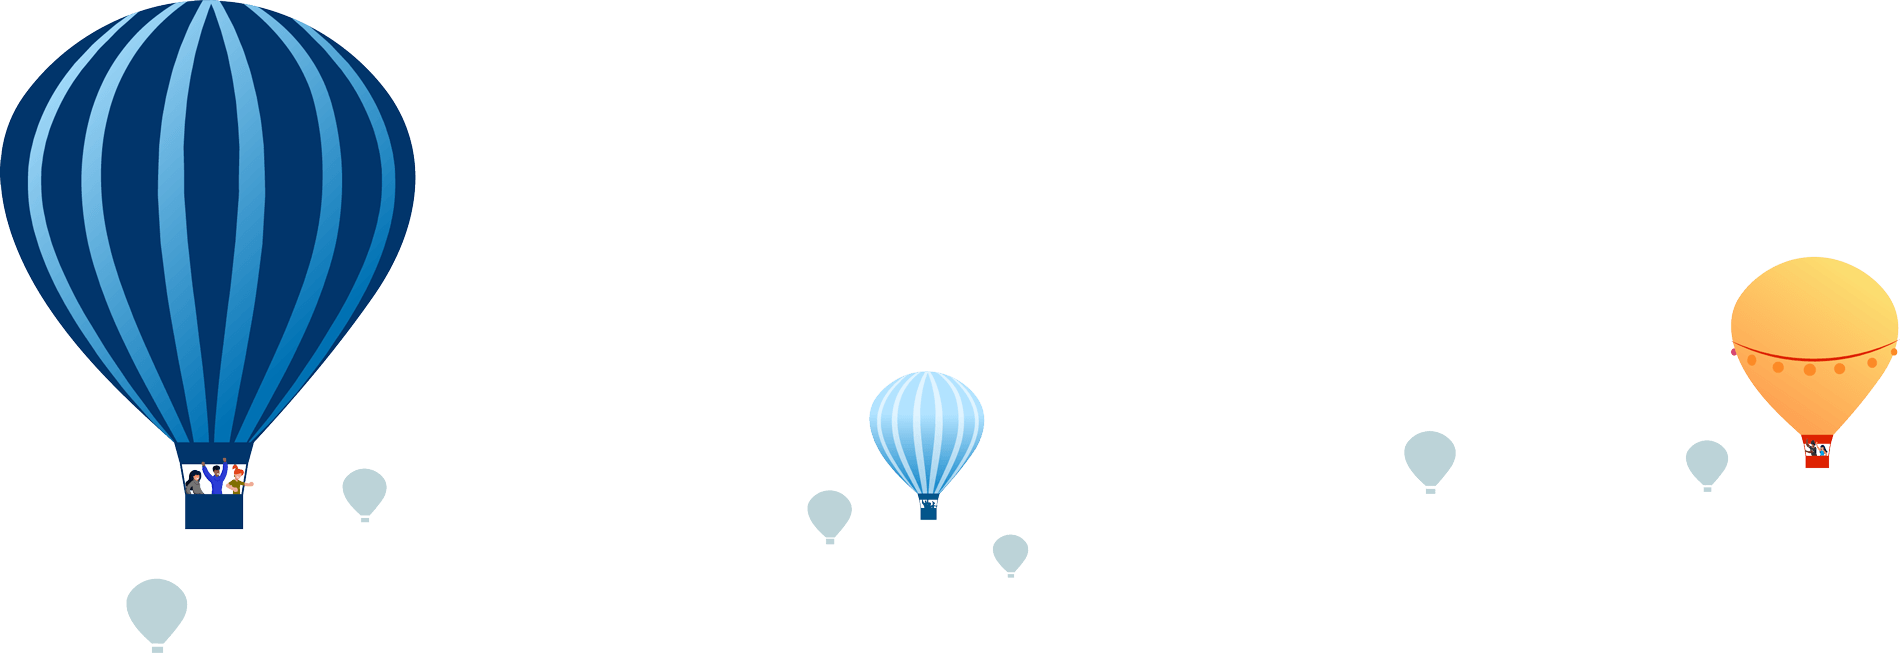 illustration of hot air balloons floating in the background